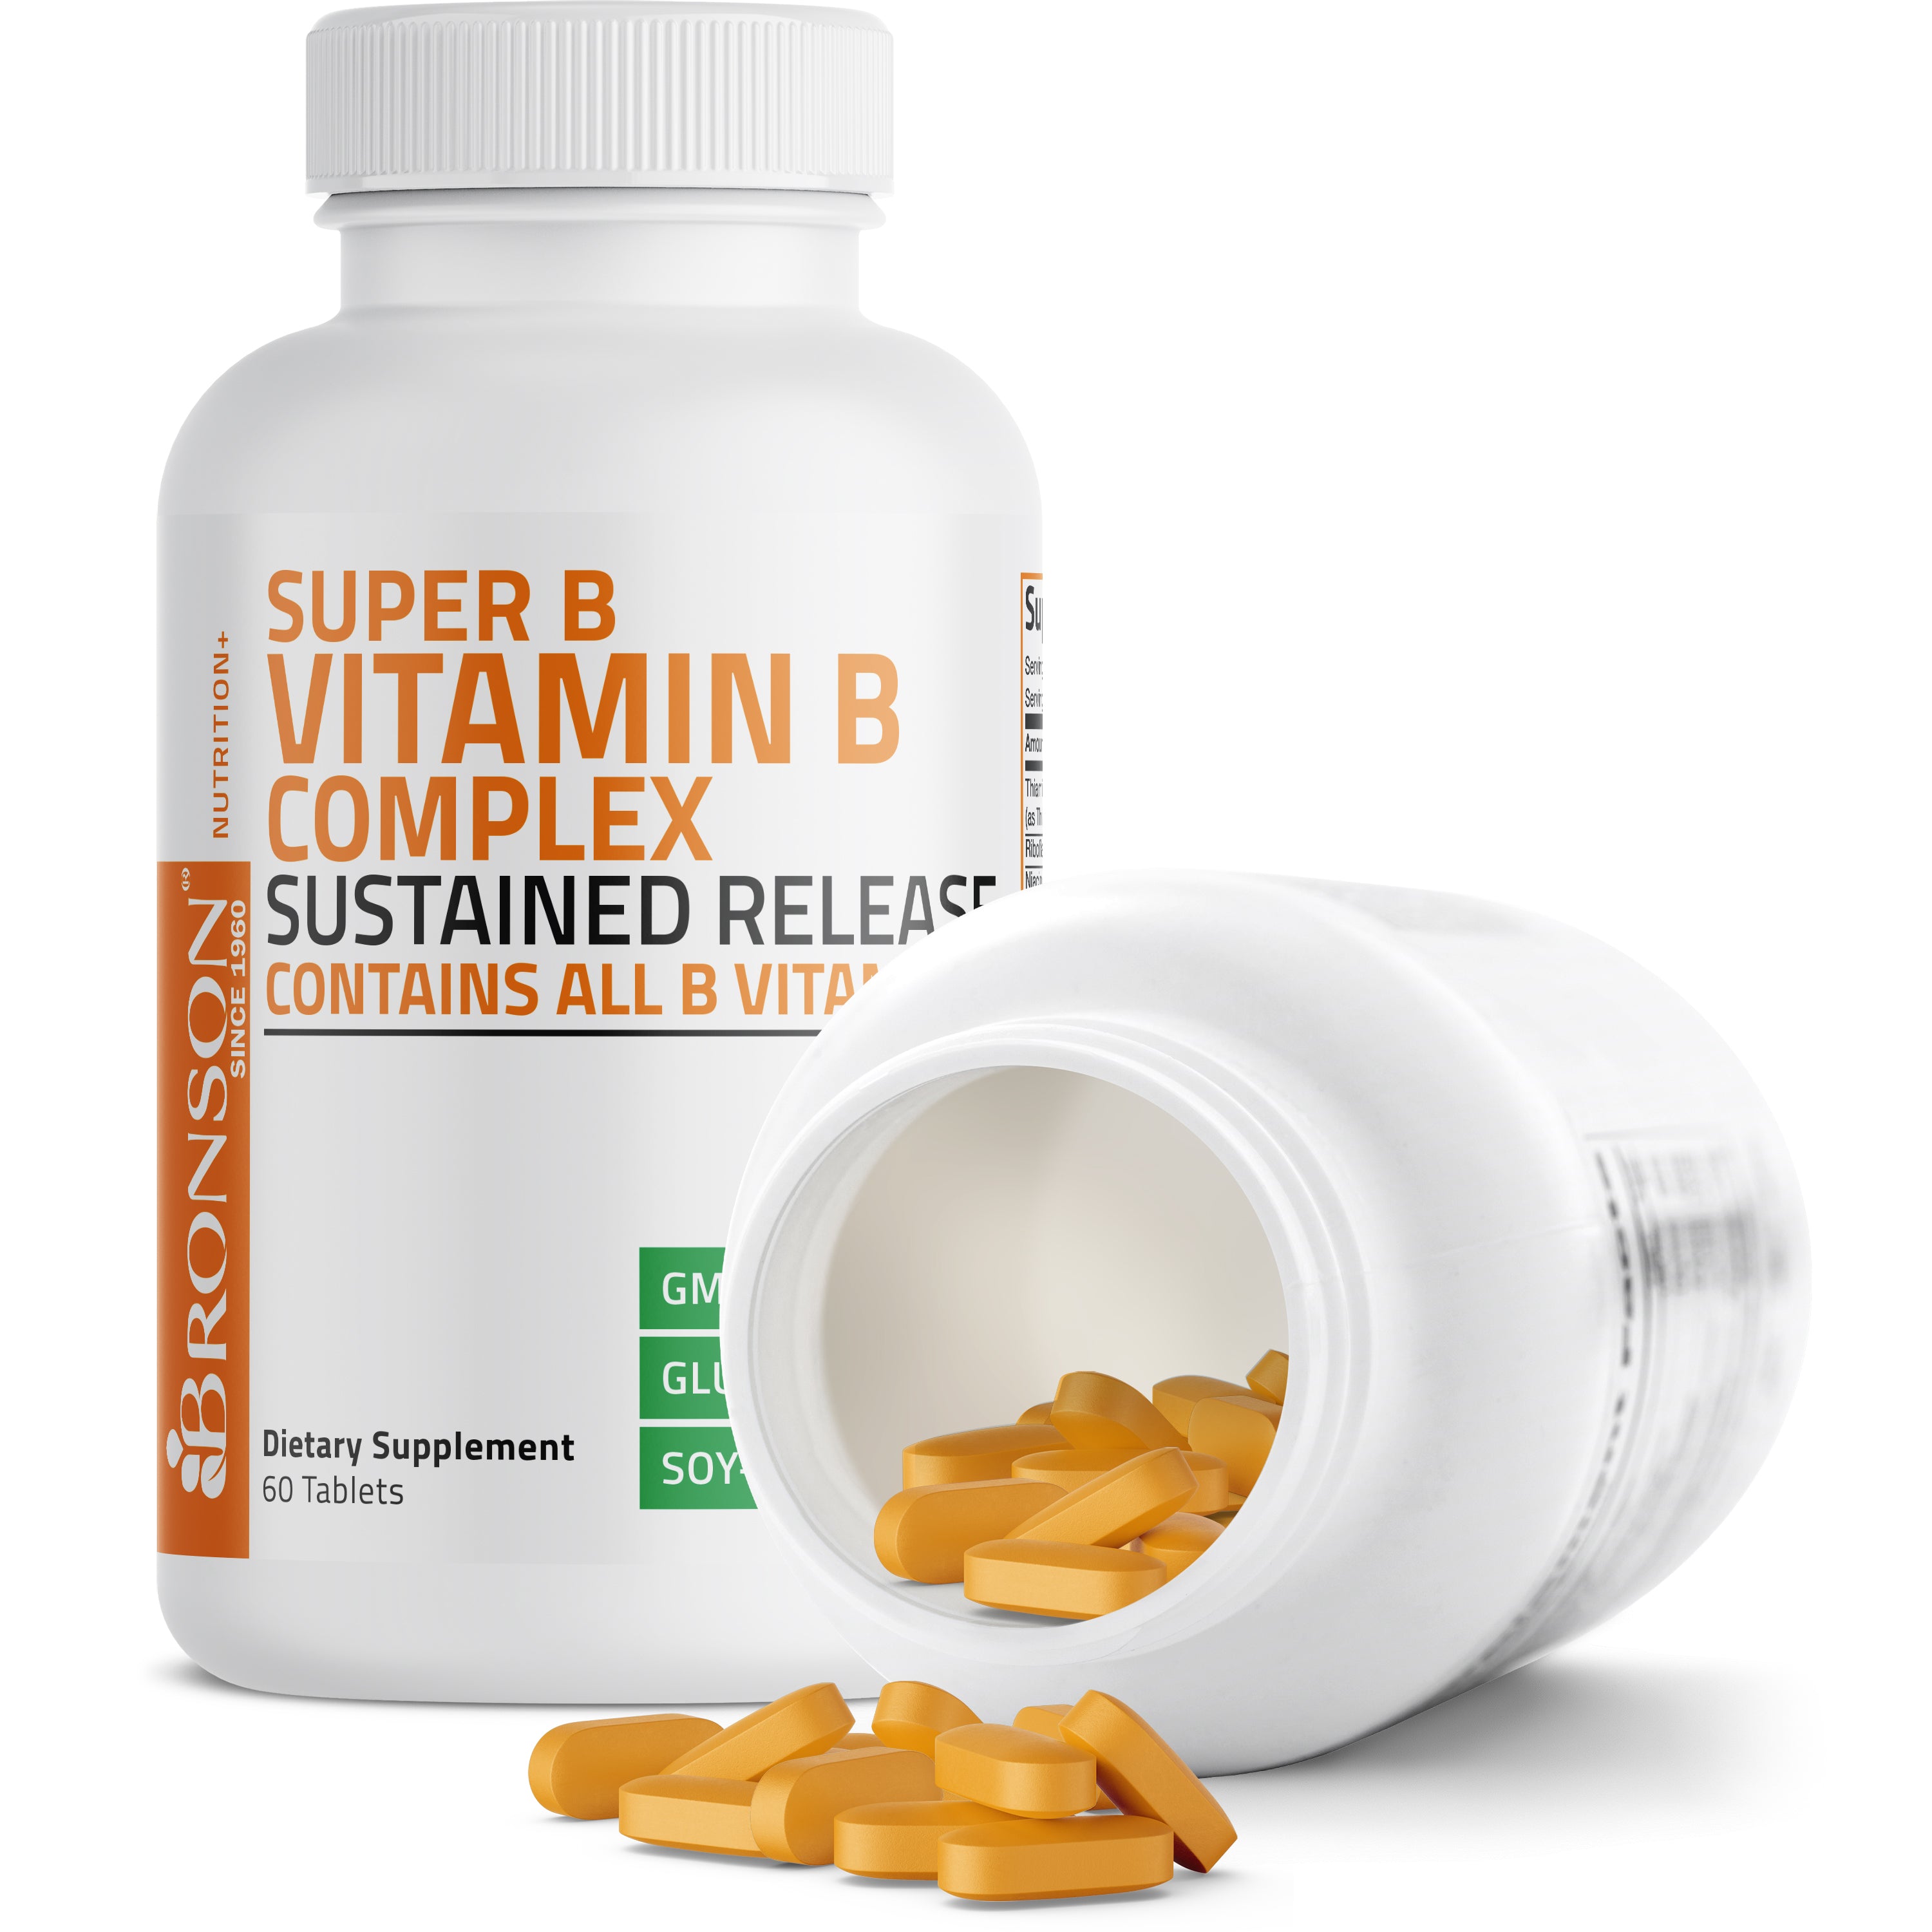 Vitamin B Complex Sustained Release view 17 of 5